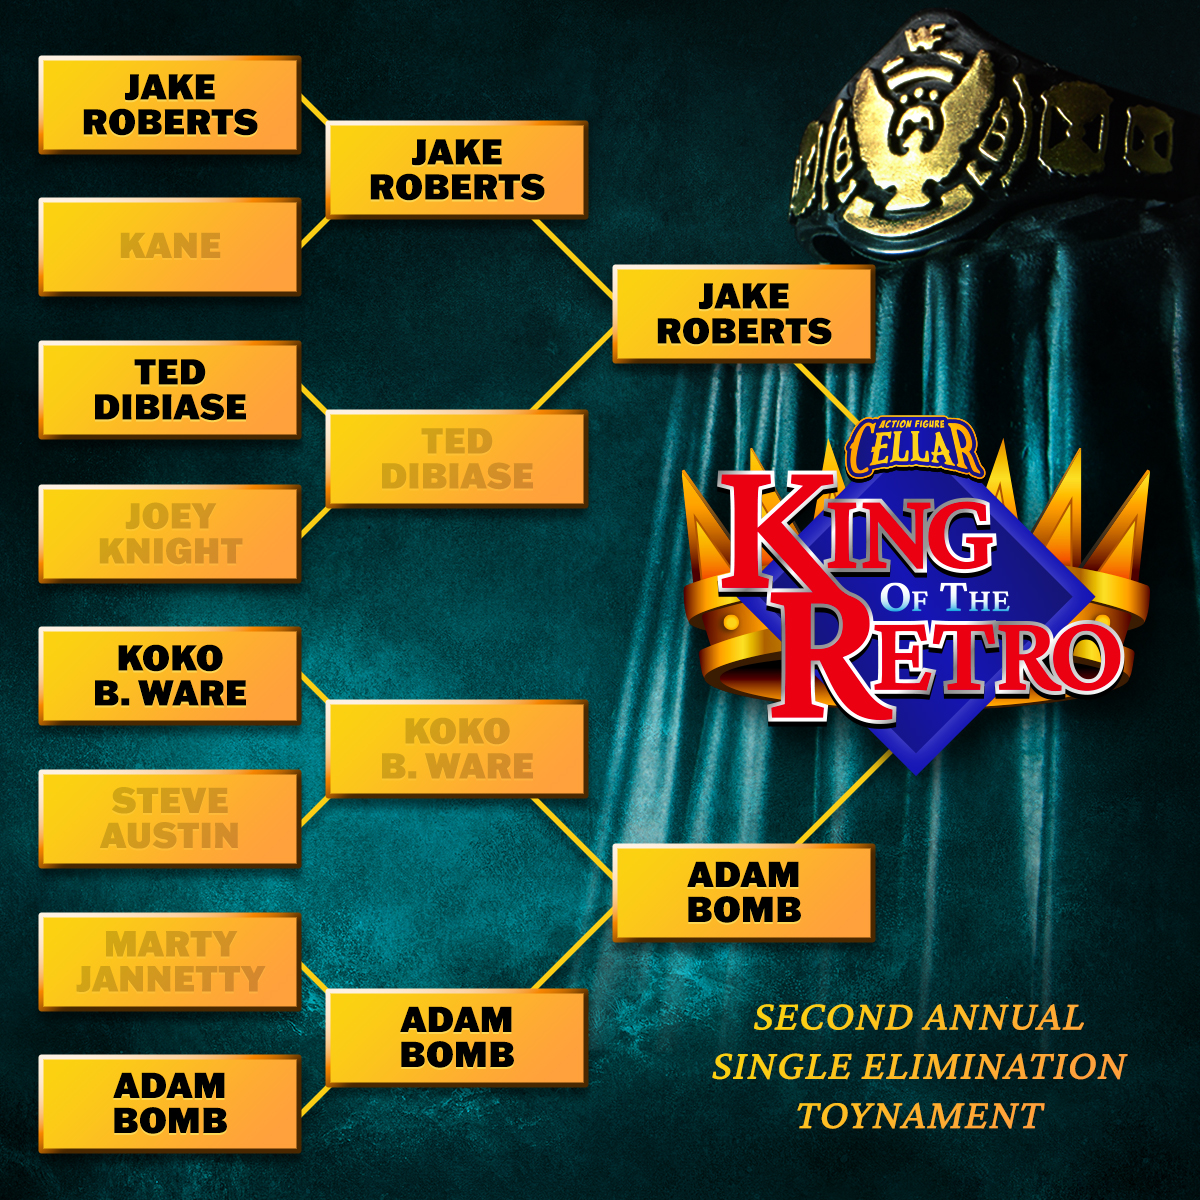 UPDATED #KingOfTheRetro bracket...

👑 KING OF THE RETRO FINAL 👑
@JakeSnakeDDT vs @RealBryanClark

*Check out my online shop actionfigurecellar.com for some King Of The Retro merchandise!

**Use my coupon code CELLAR for 10% OFF at ringsidecollectibles.com

#WWFHasbro #hWo